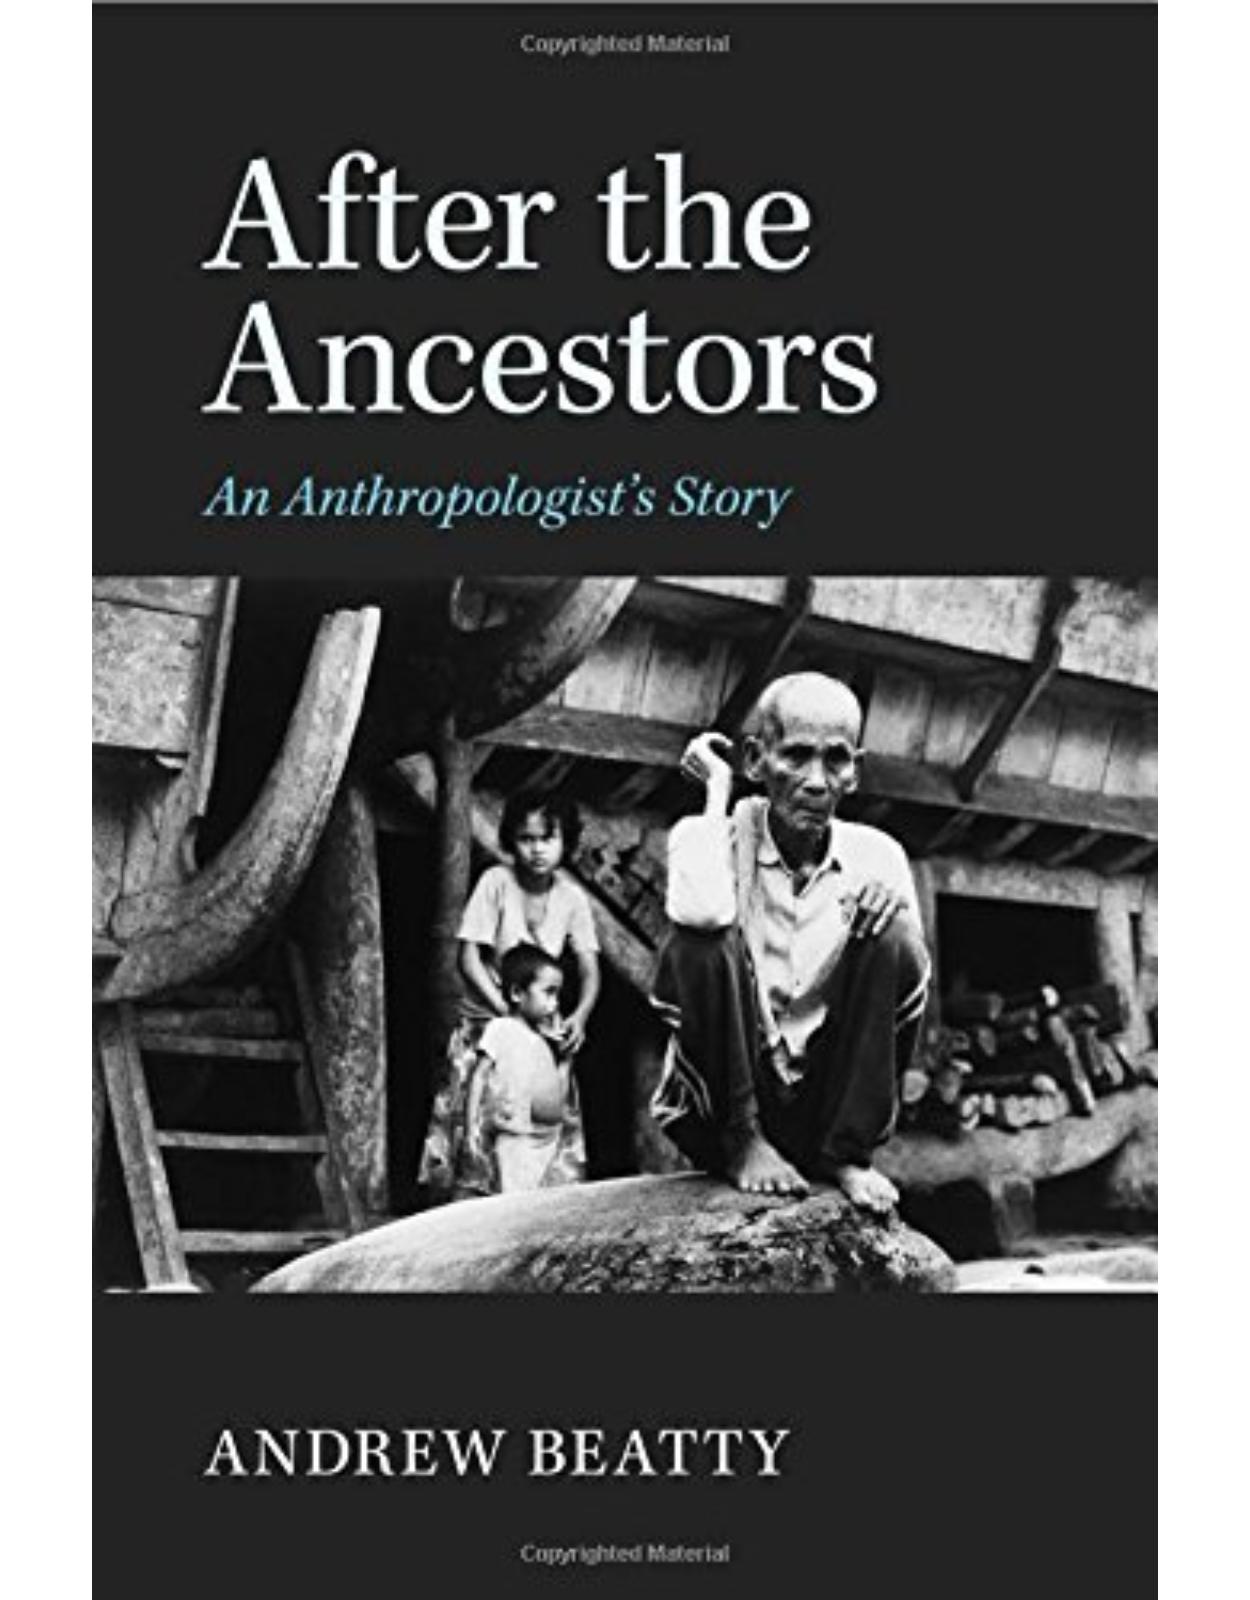 After the Ancestors: An Anthropologist's Story (New Departures in Anthropology)